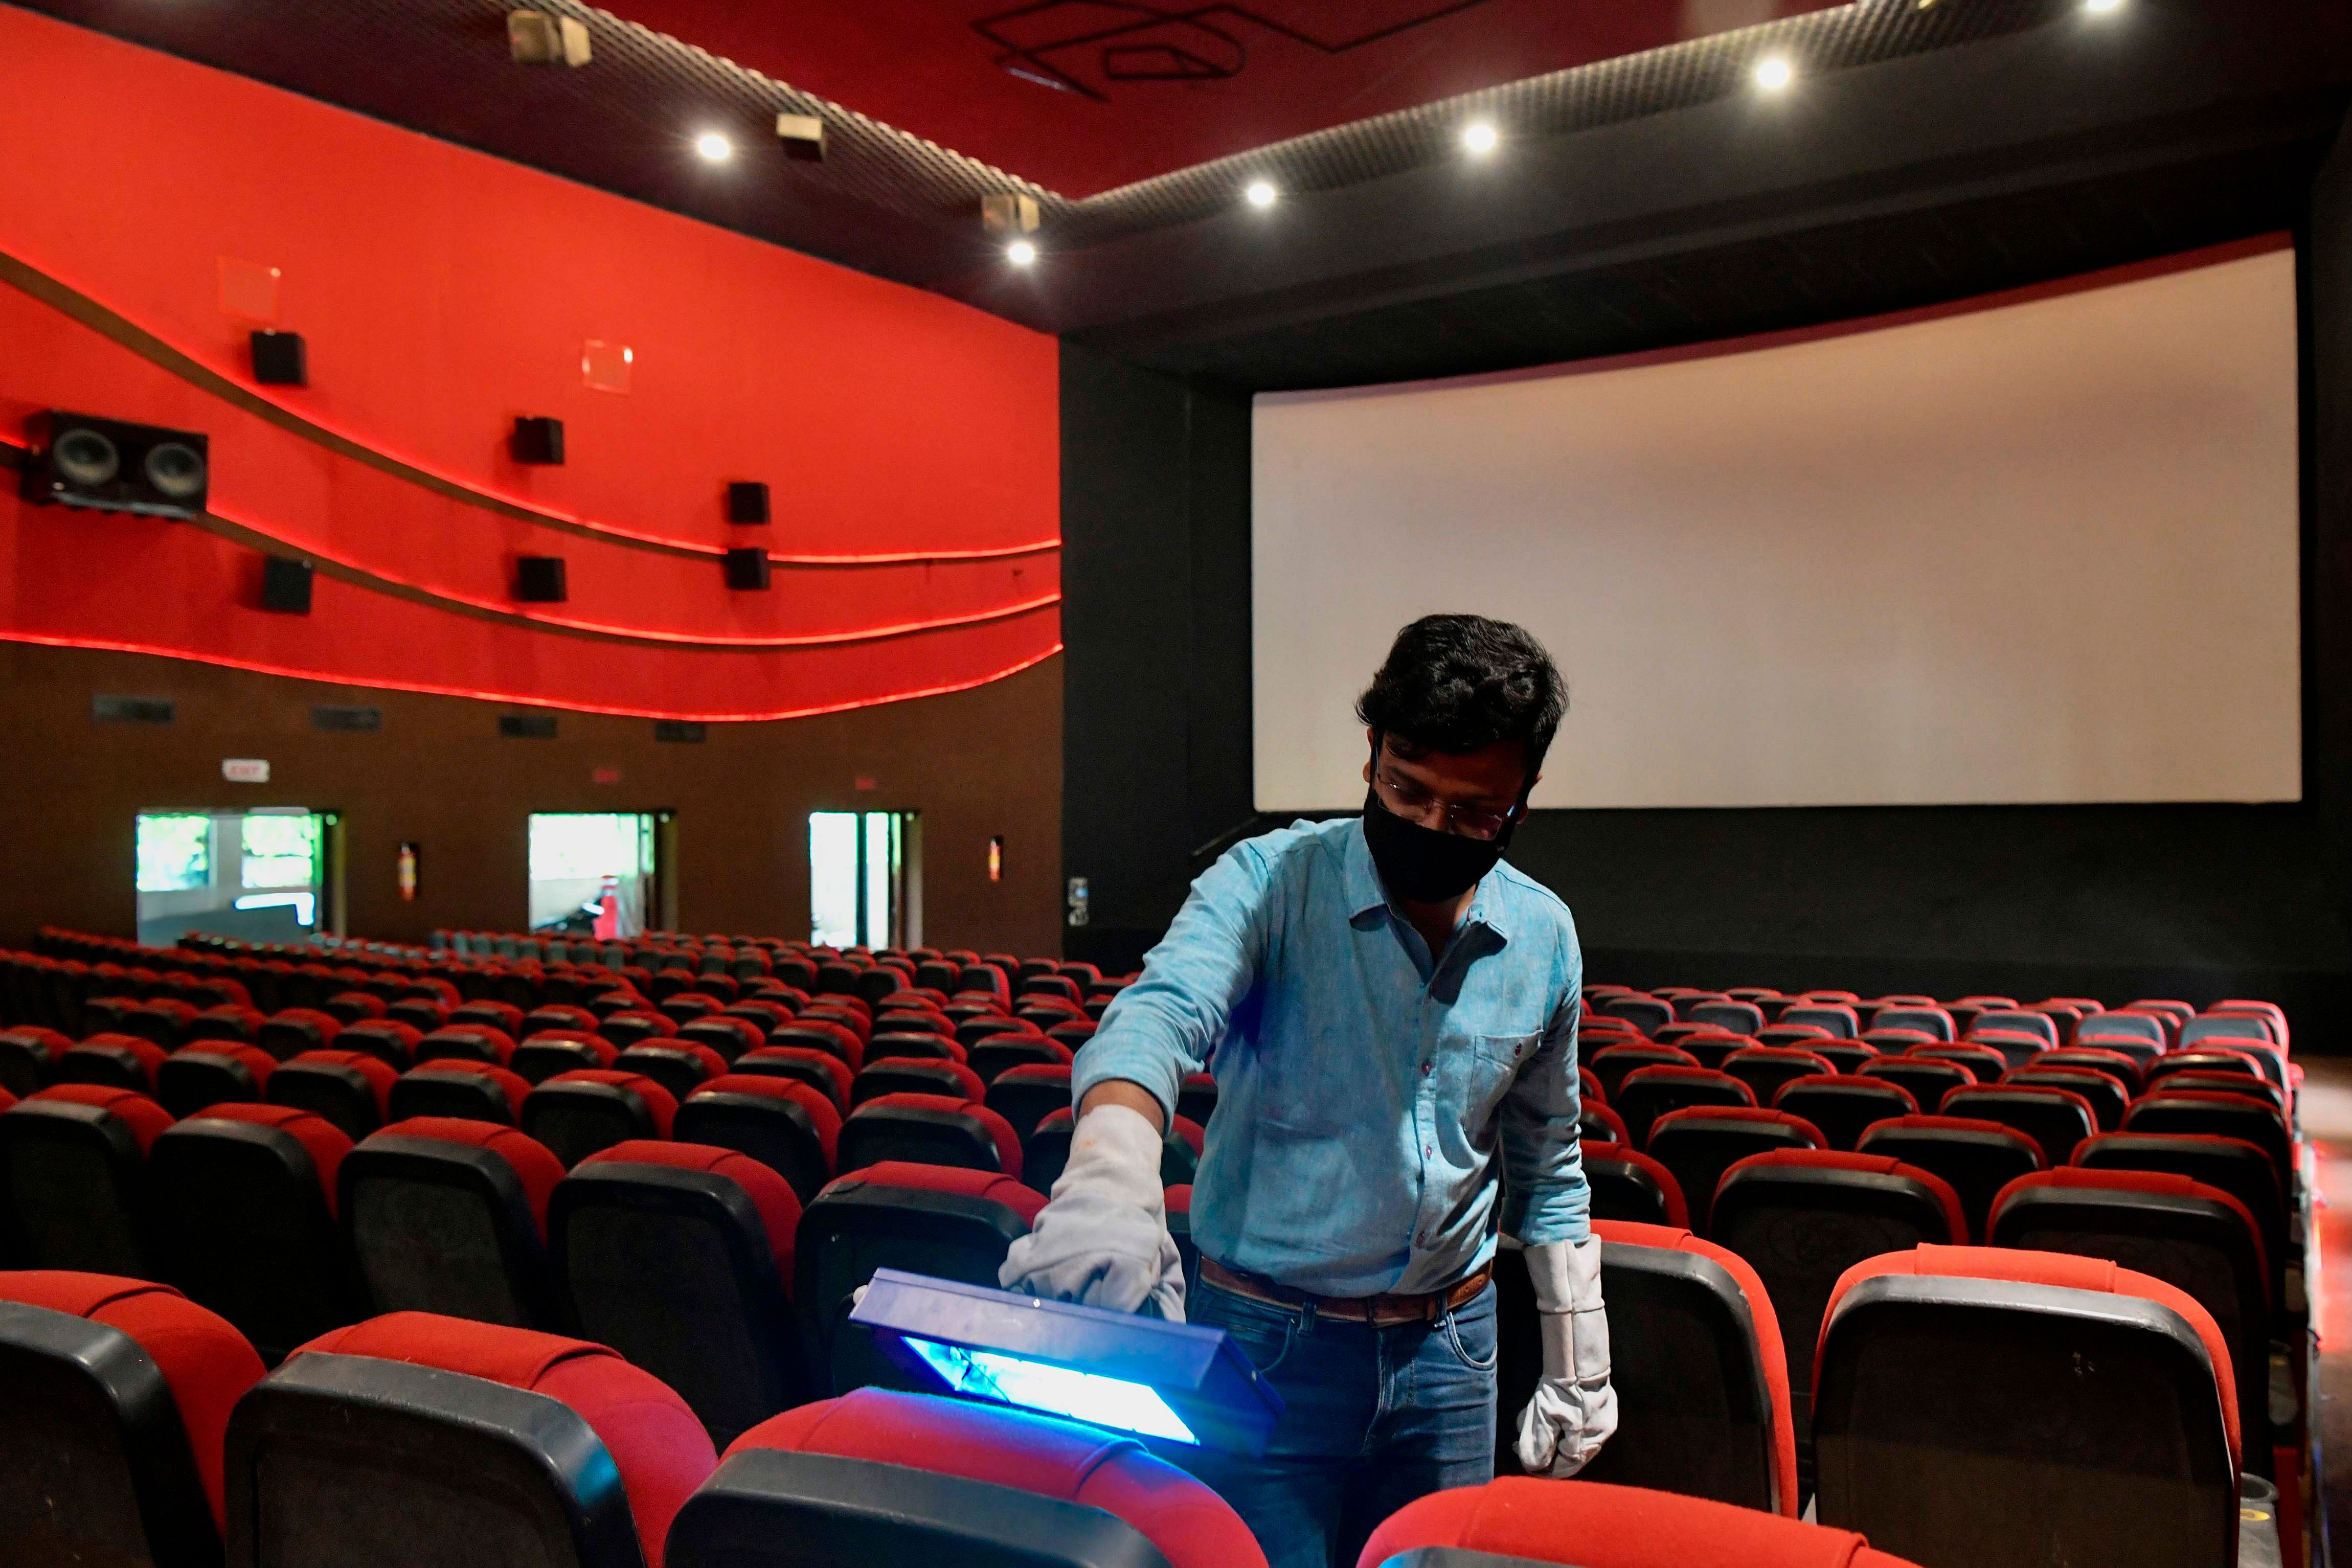 A vendor (L) demonstrates the sterilisation process with an ultraviolet light device on cinema theatre seats in Bangalore on October 8, 2020 as cinemas prepare to reopen on October 15 at 50 percent seating capacity after closing due to the Covid-19 coronavirus pandemic. Credit: AFP File Photo